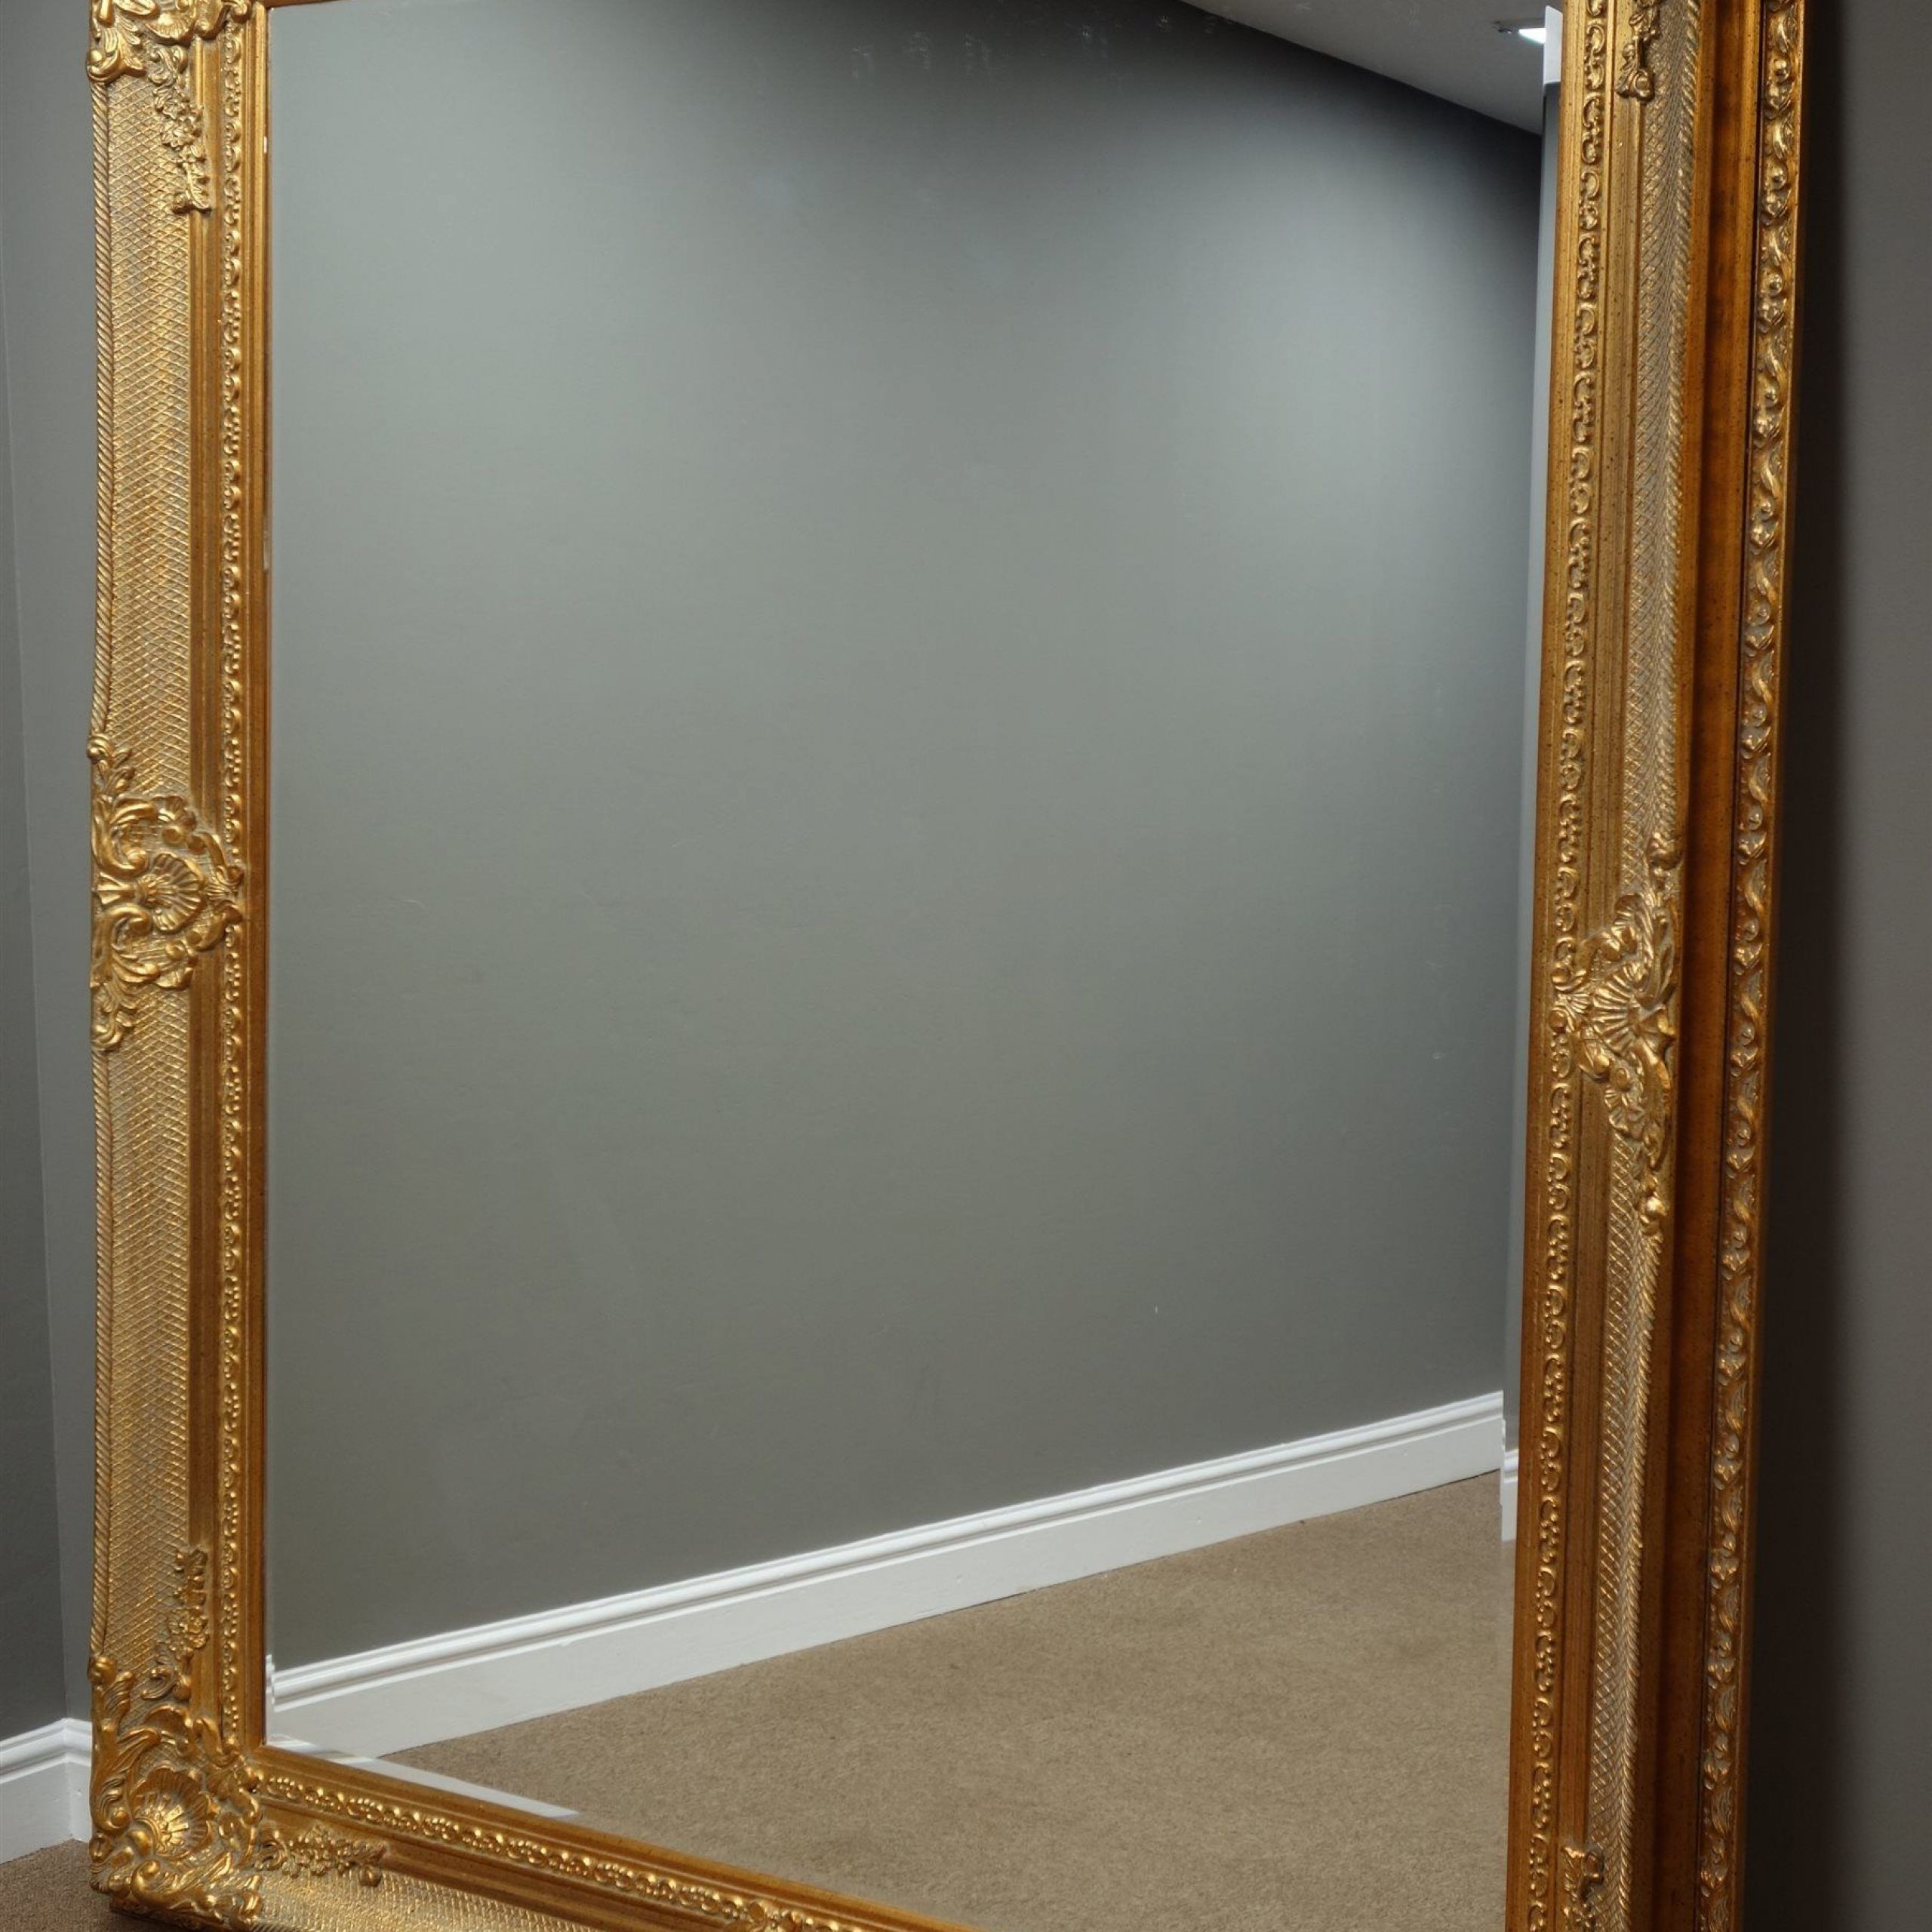 Large Rectangular Bevelled Edge Wall Mirror In Ornate Swept Gilt Frame Intended For Farmhouse Woodgrain And Leaf Accent Wall Mirrors (View 2 of 15)